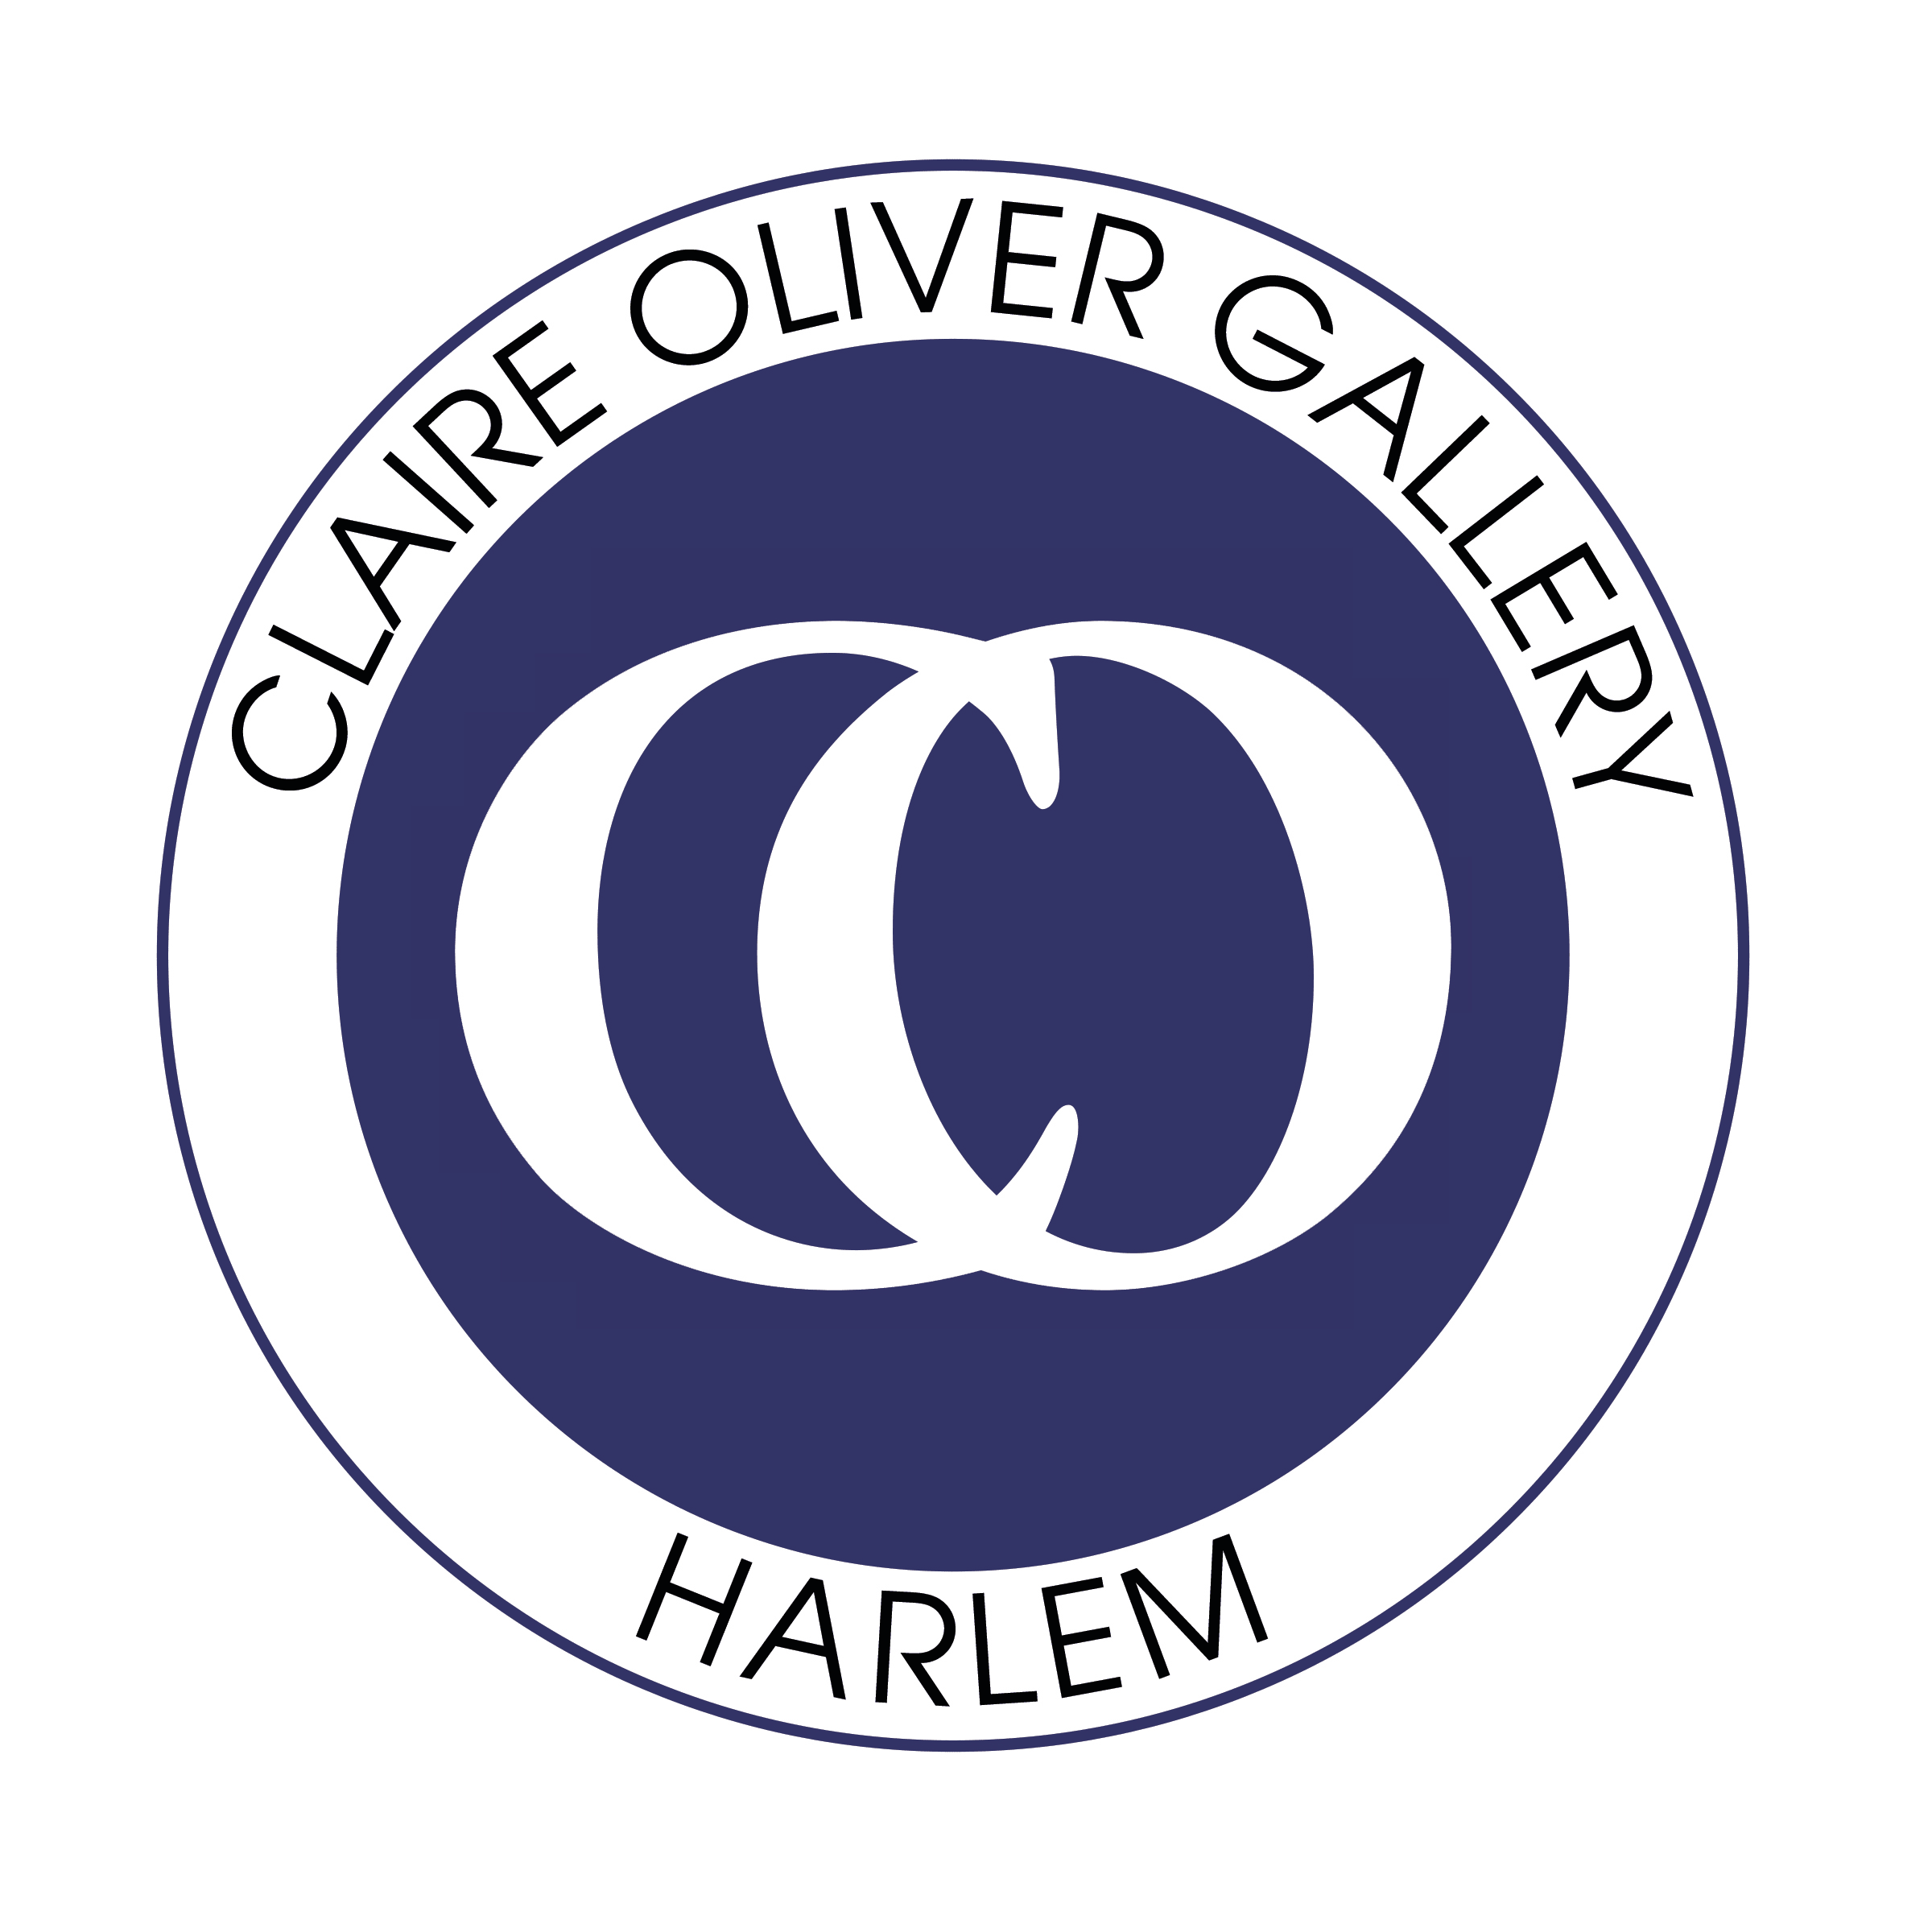 Claire Oliver Gallery company logo